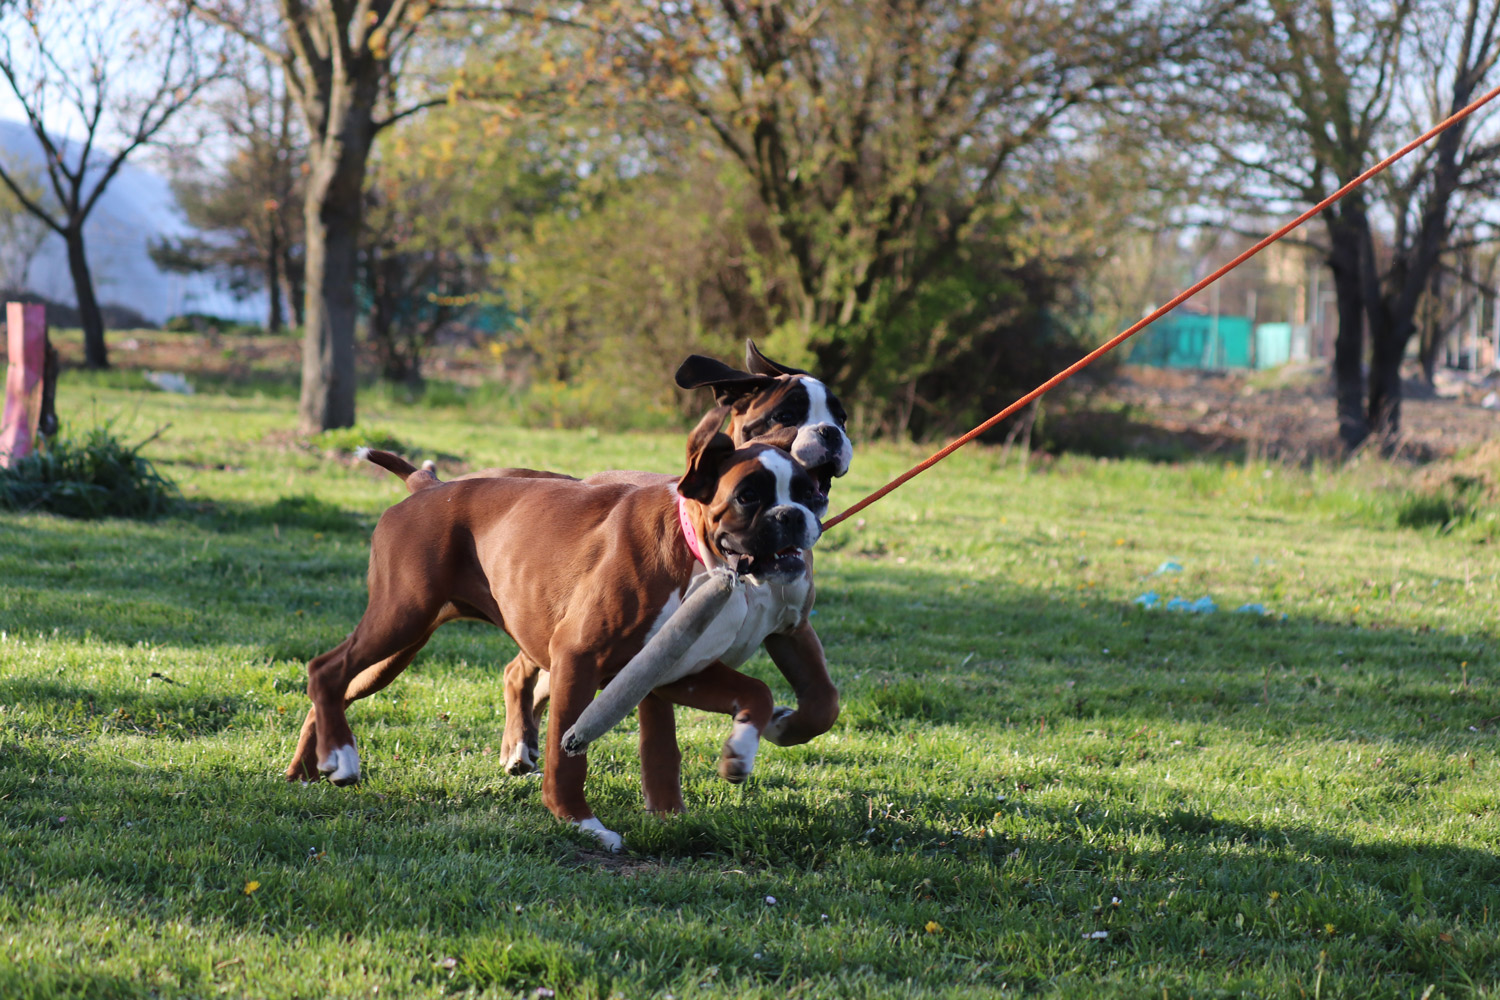 Two yellow German white boxers run on the grass with a toy in their mouth and an orange string